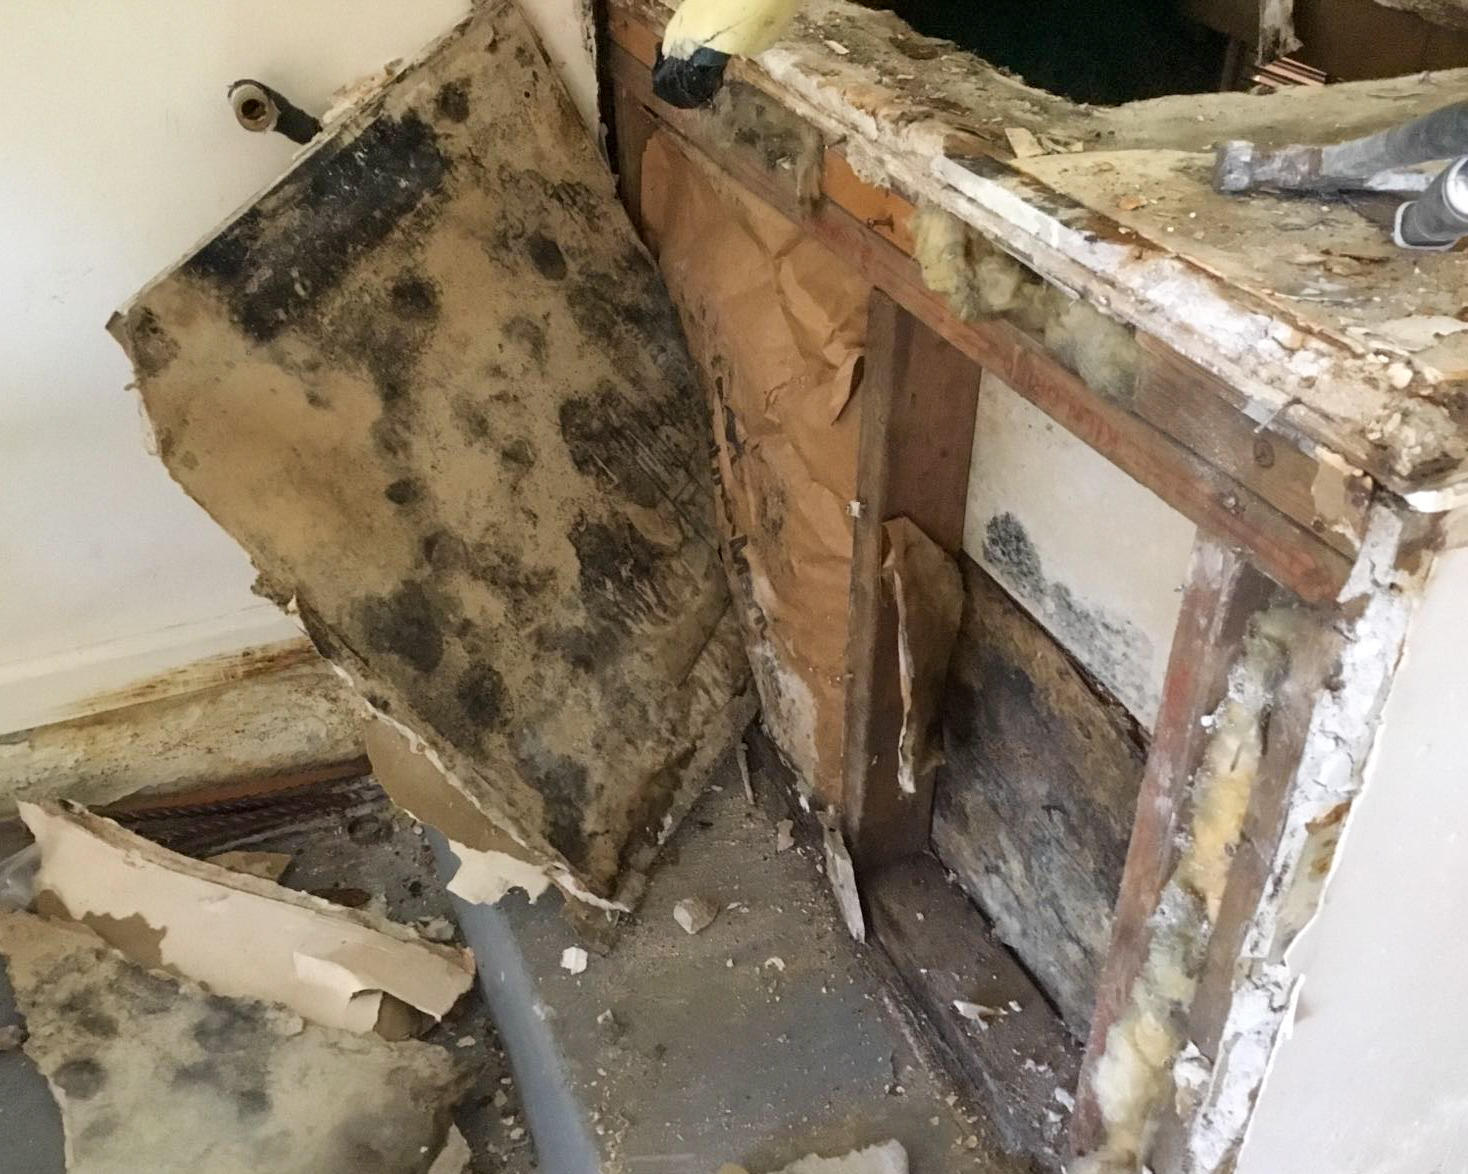 Mold can grow quickly. SERVPRO of Delray Beach can immediately respond to your mold damage by cleaning properly the effected area.